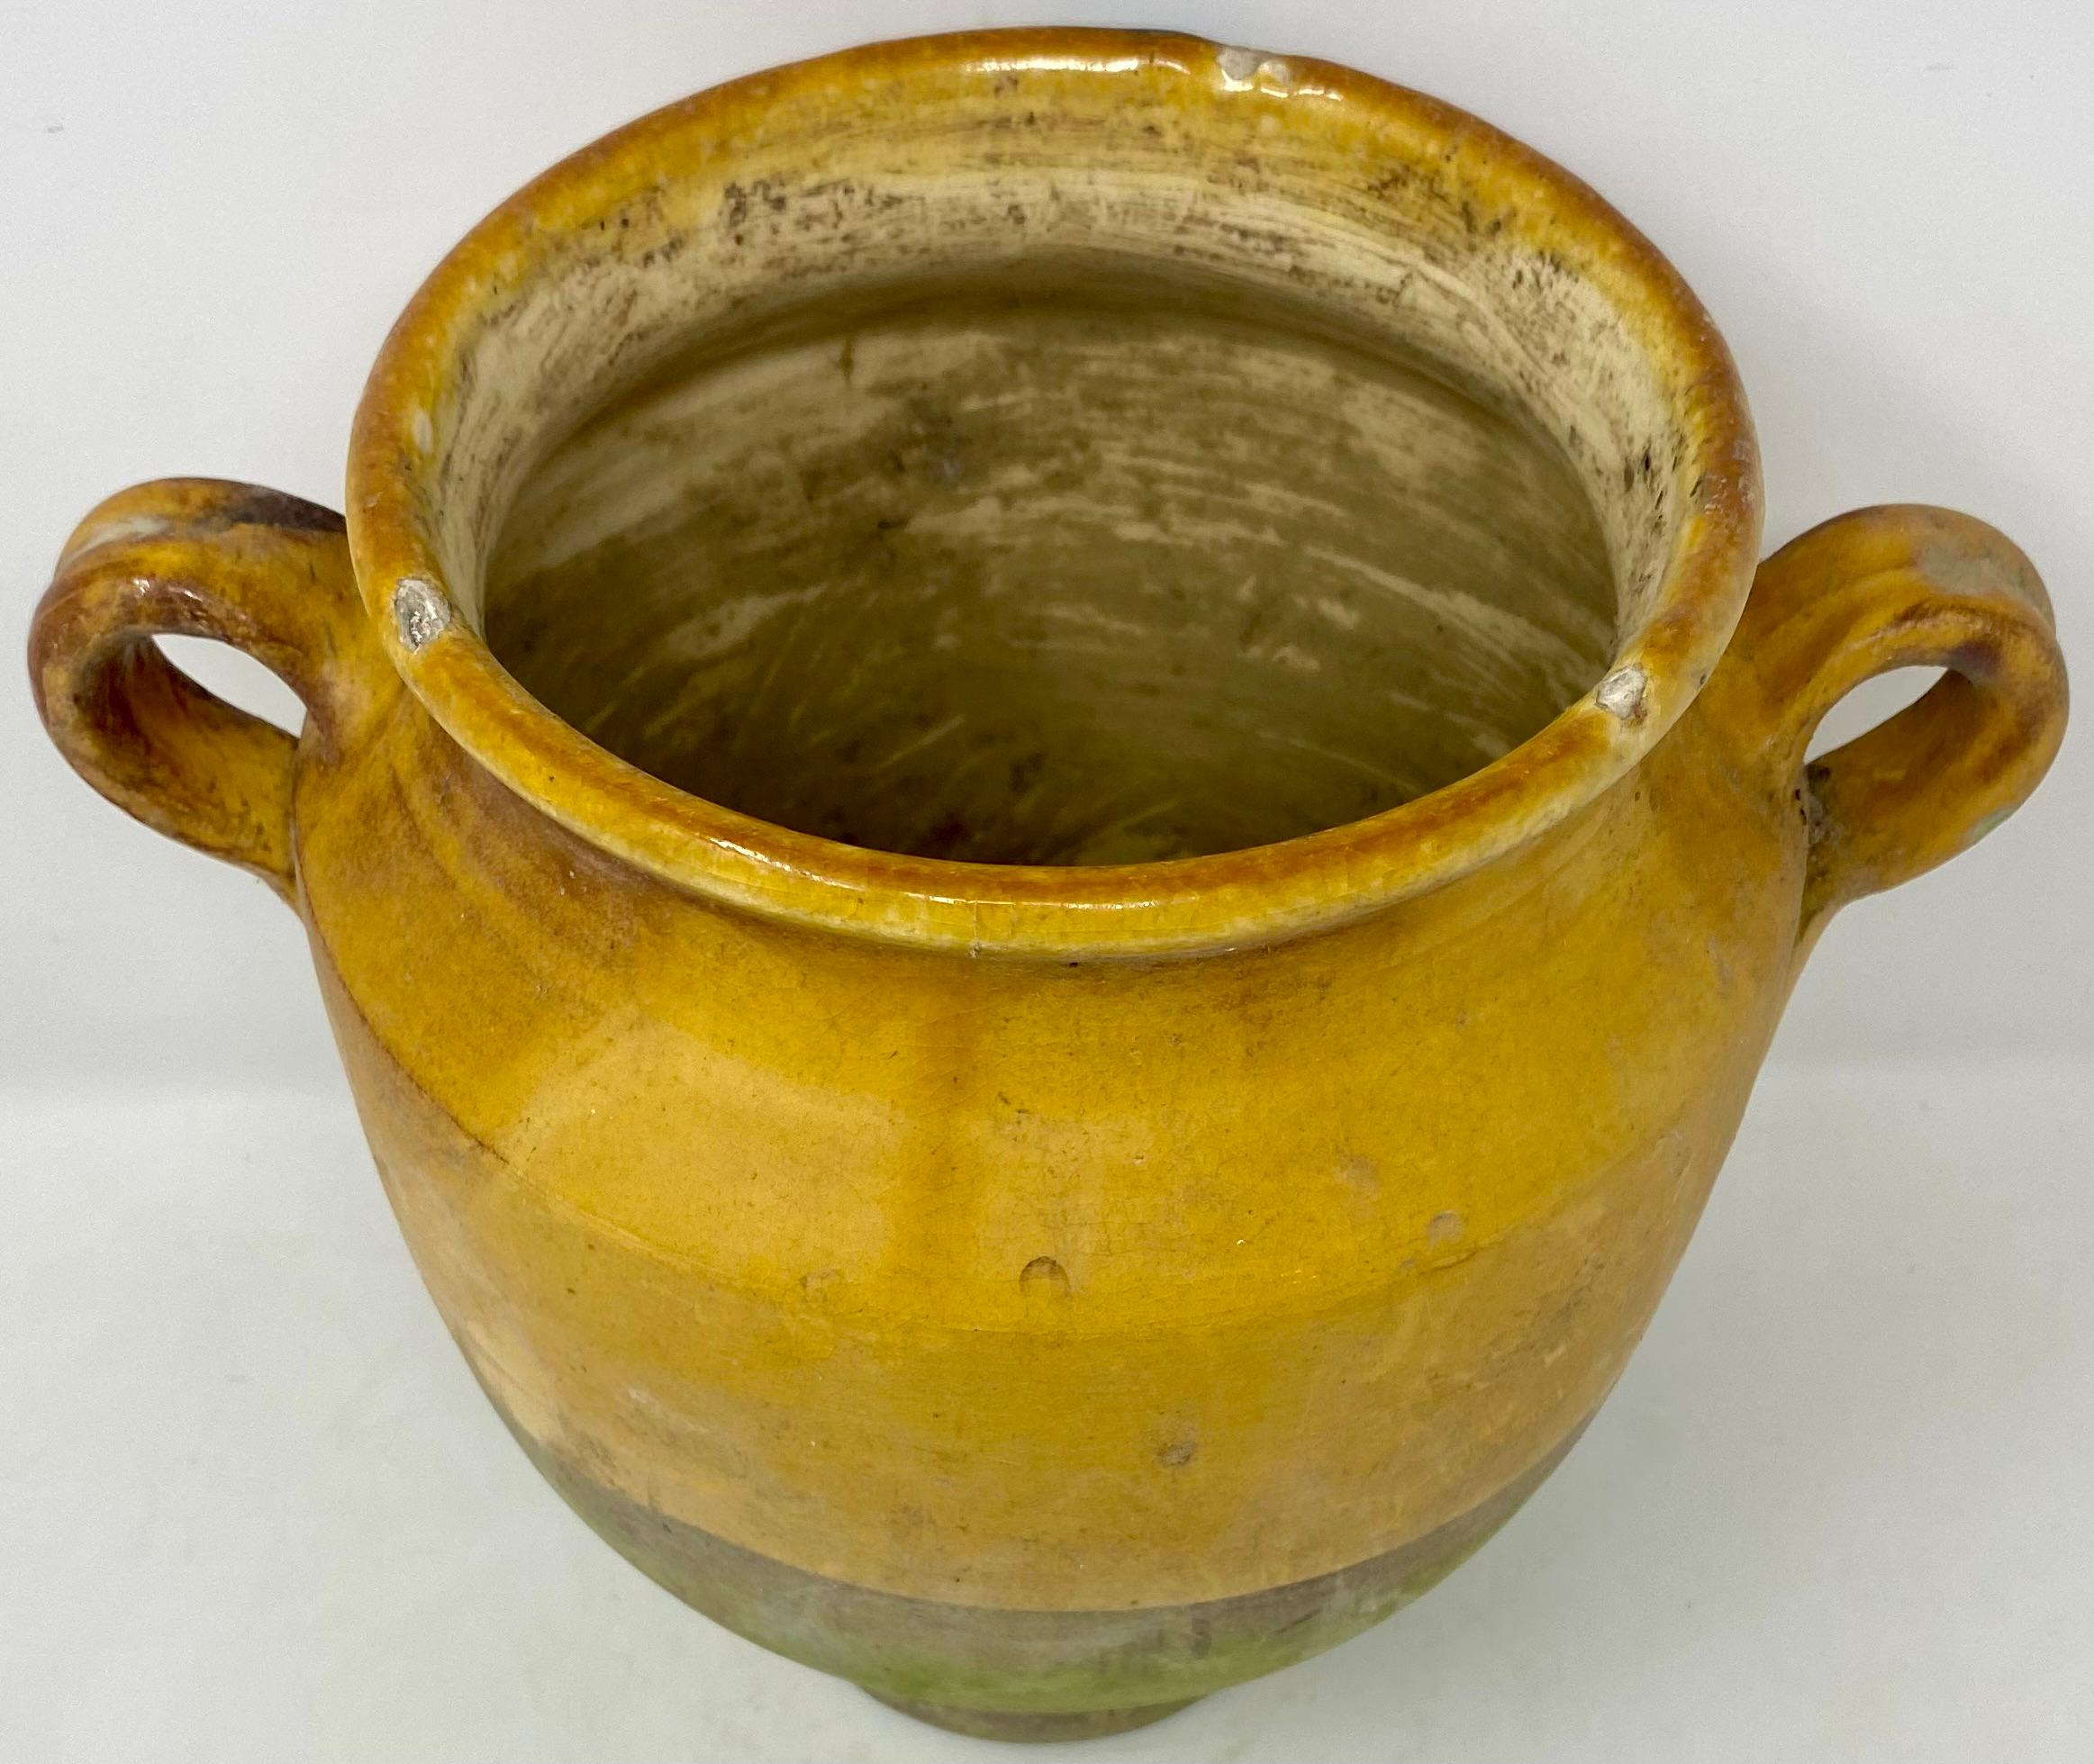 Vintage hand-made French Provincial yellow terracotta glazed confit pottery jar with handles.
Per the last photo we have a few of these in various sizes and shapes. Each has the normal amount of wear and tear from years of use.
The one